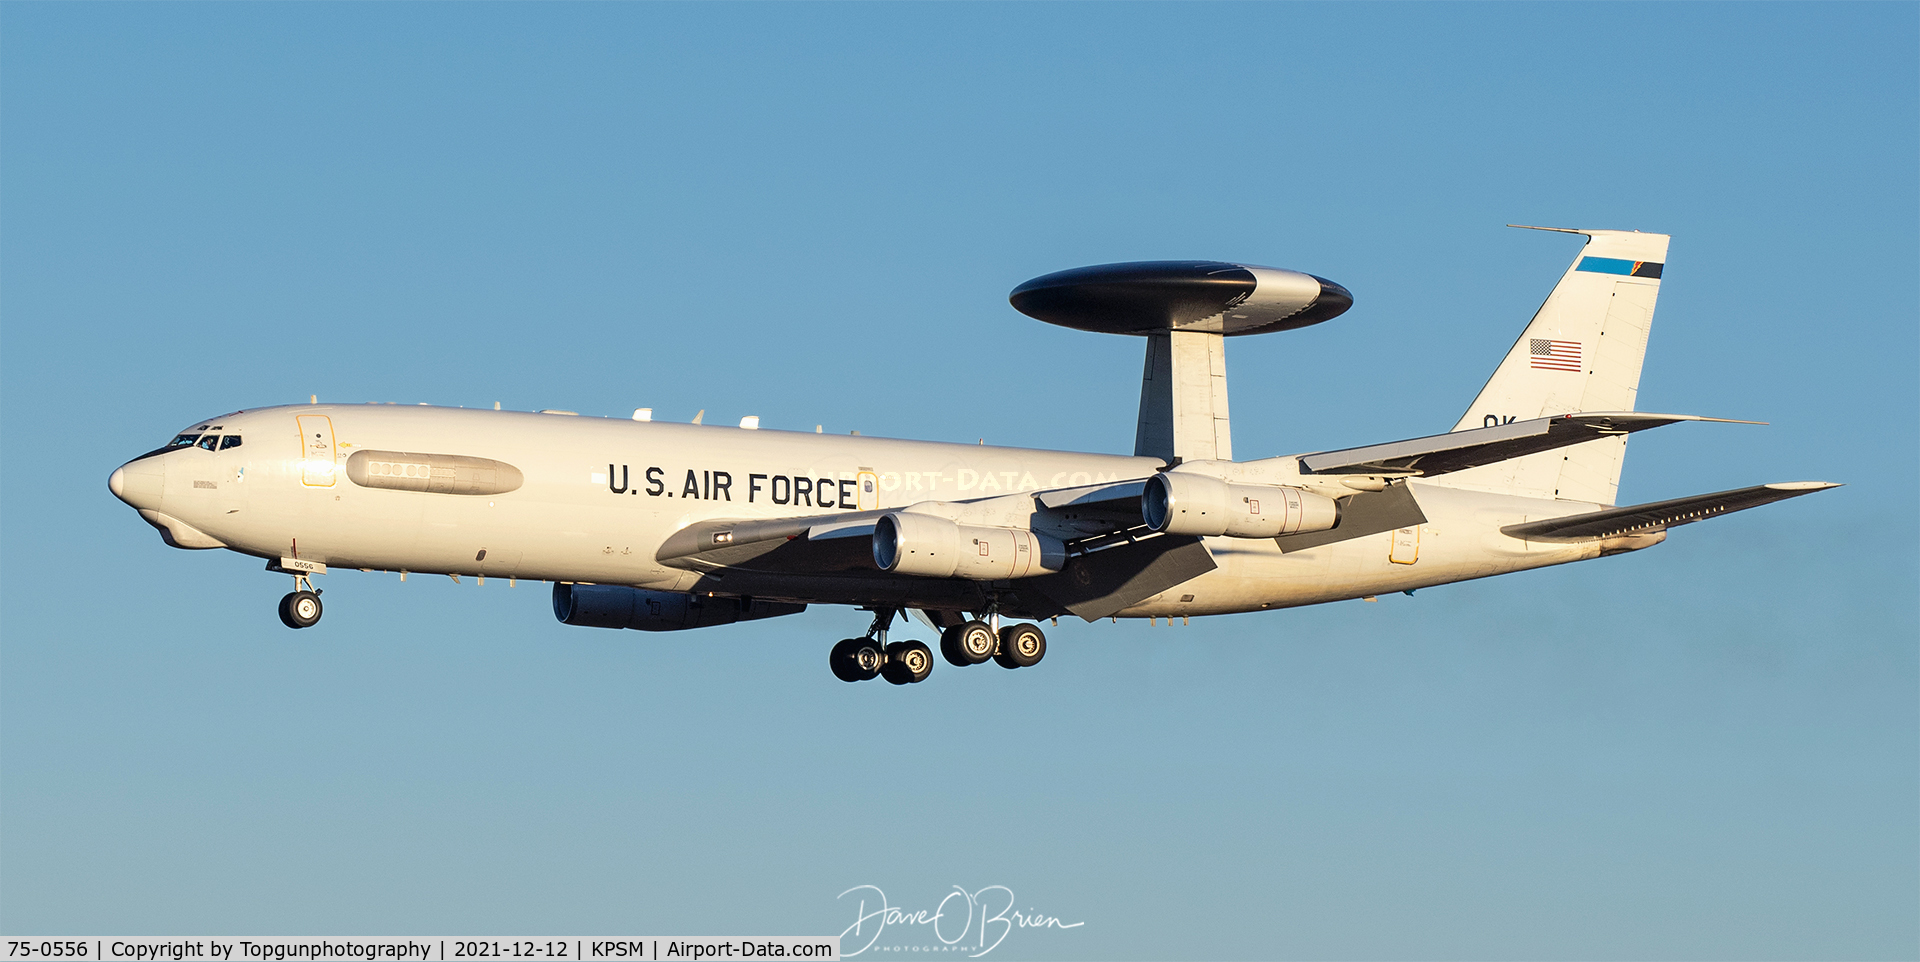 75-0556, 1975 Boeing E-3B Sentry C/N 21047, SHUCK84 drops into Pease at dusk